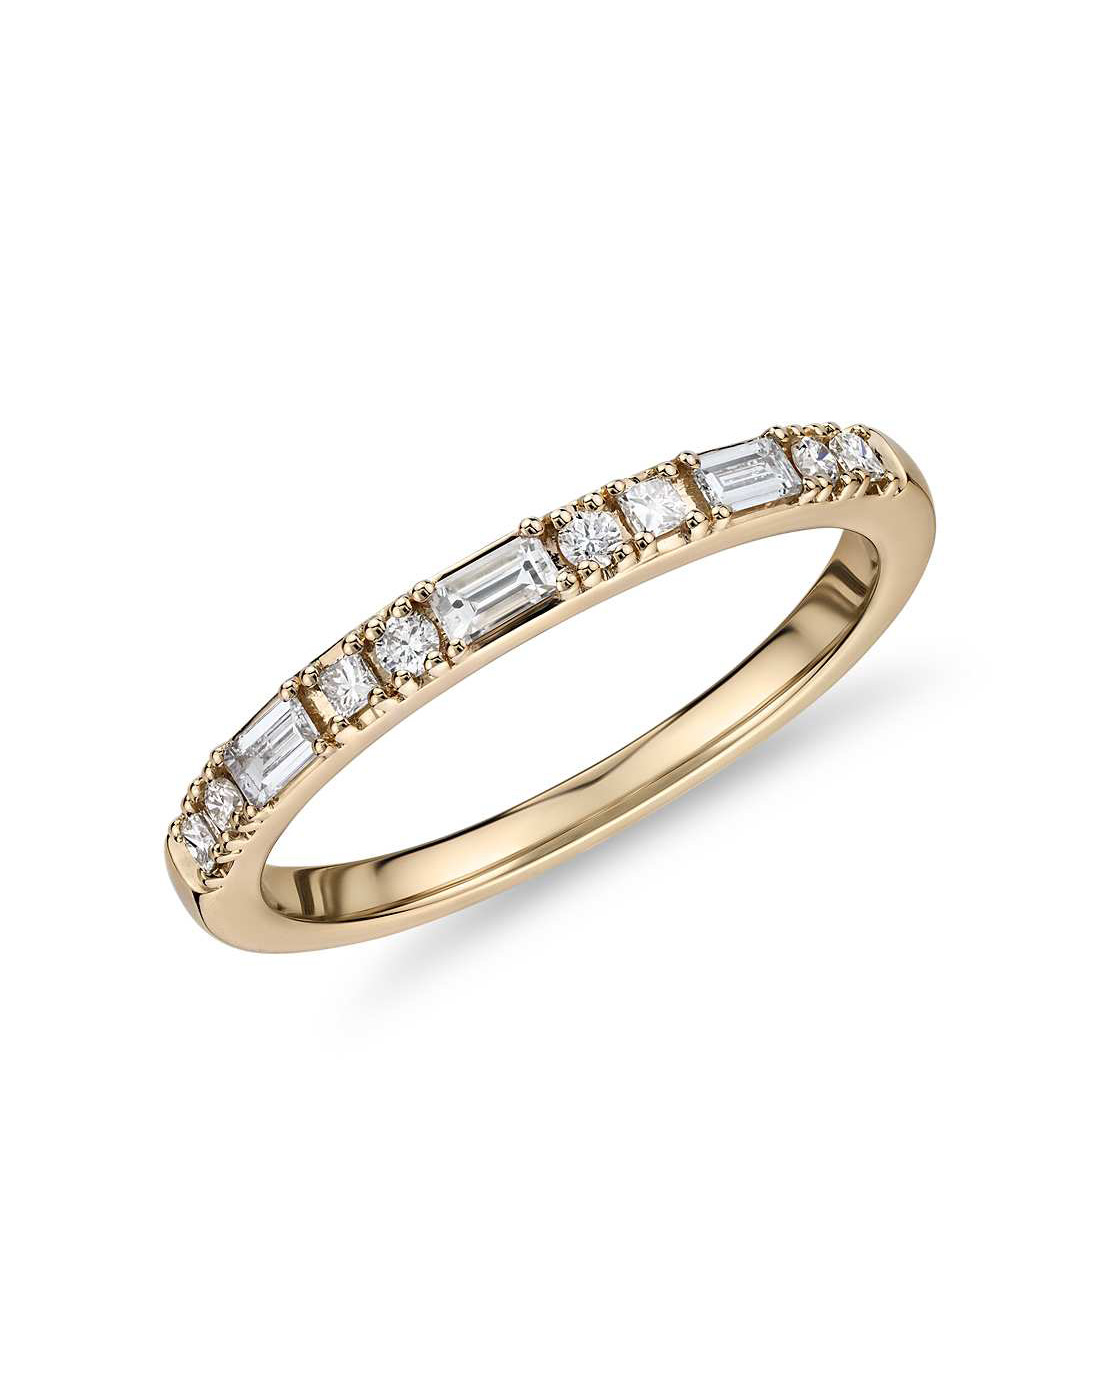 Round, baguette, and princess cut diamond ring set within 14k gold 